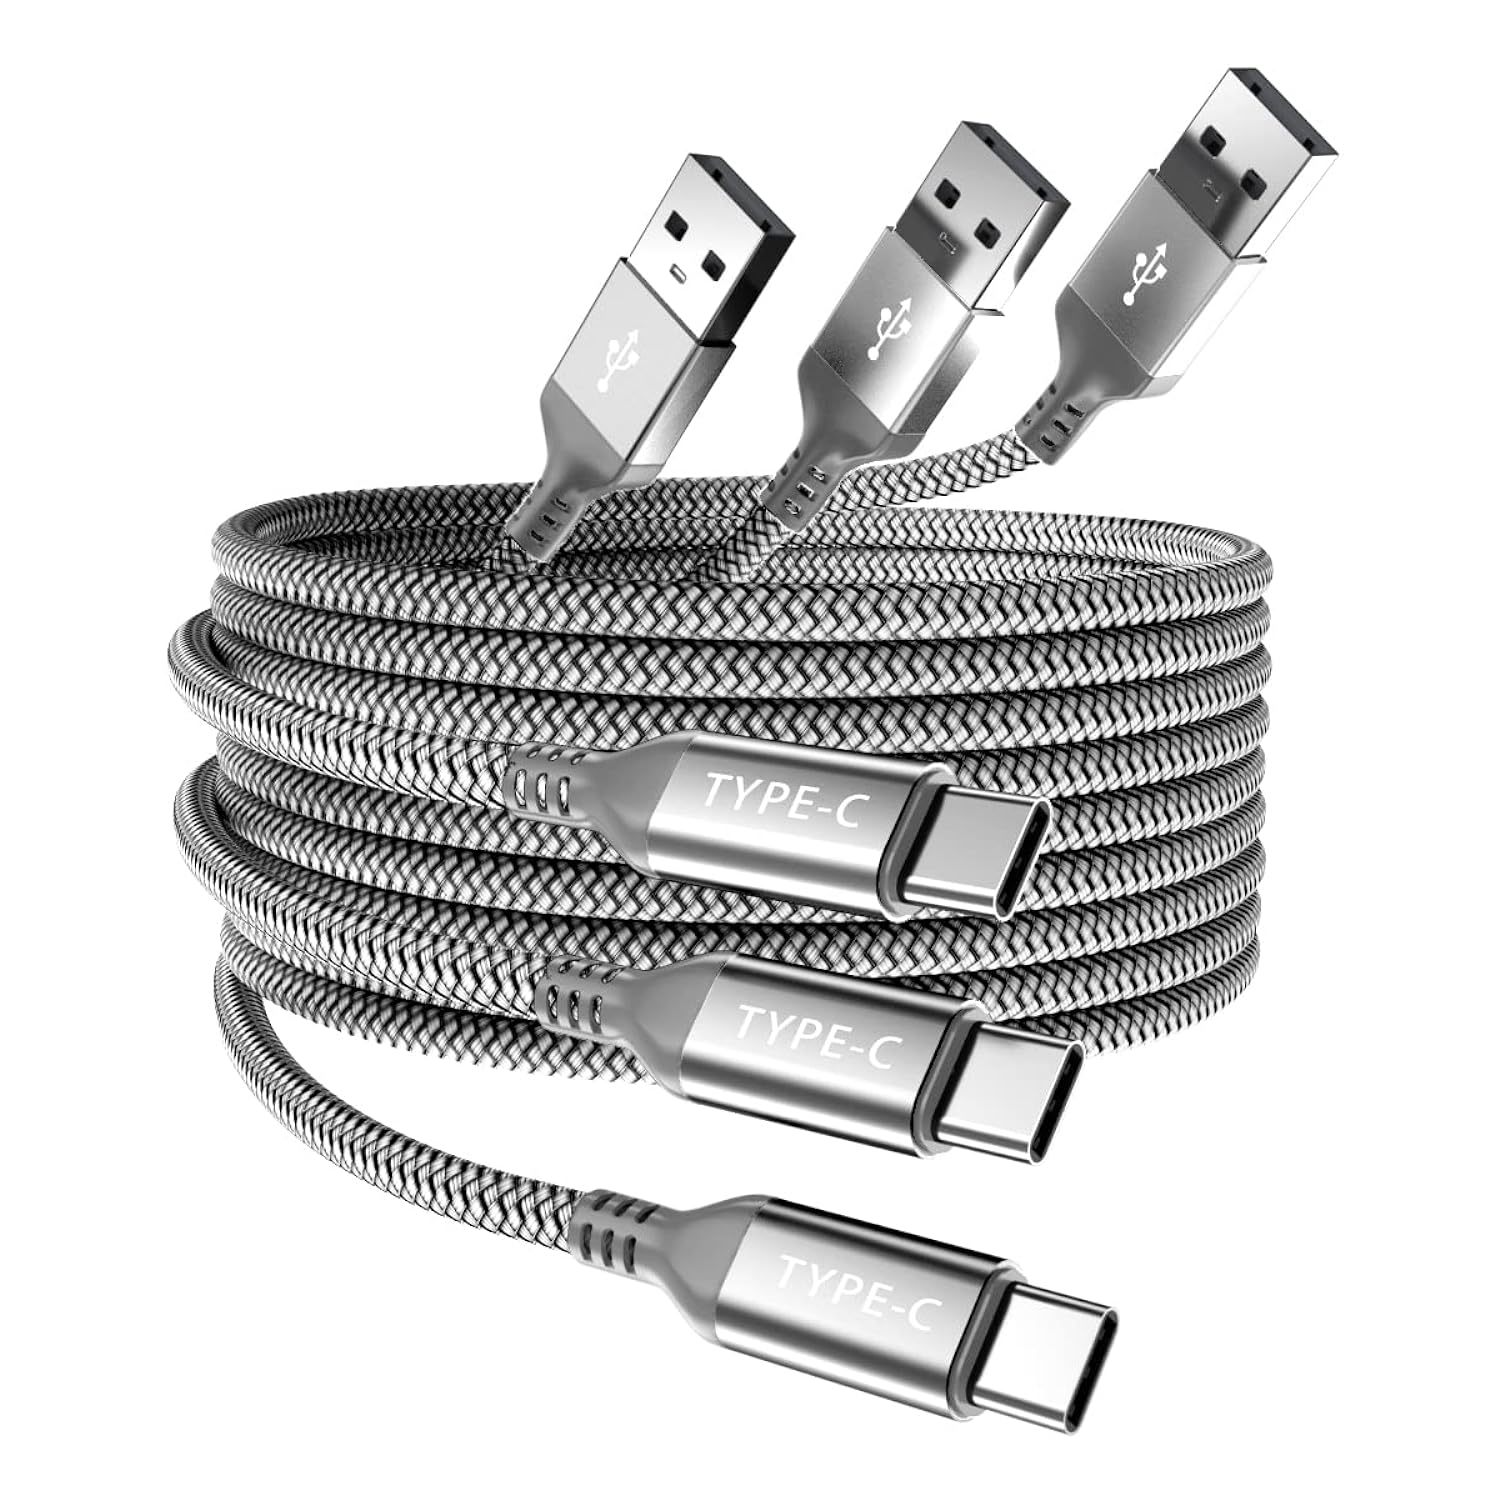 Usb Type C Charger Cable 3Pack 1.5/3.3/6.6Ft,Charging Power Cord For Samsung Gal - $20.99